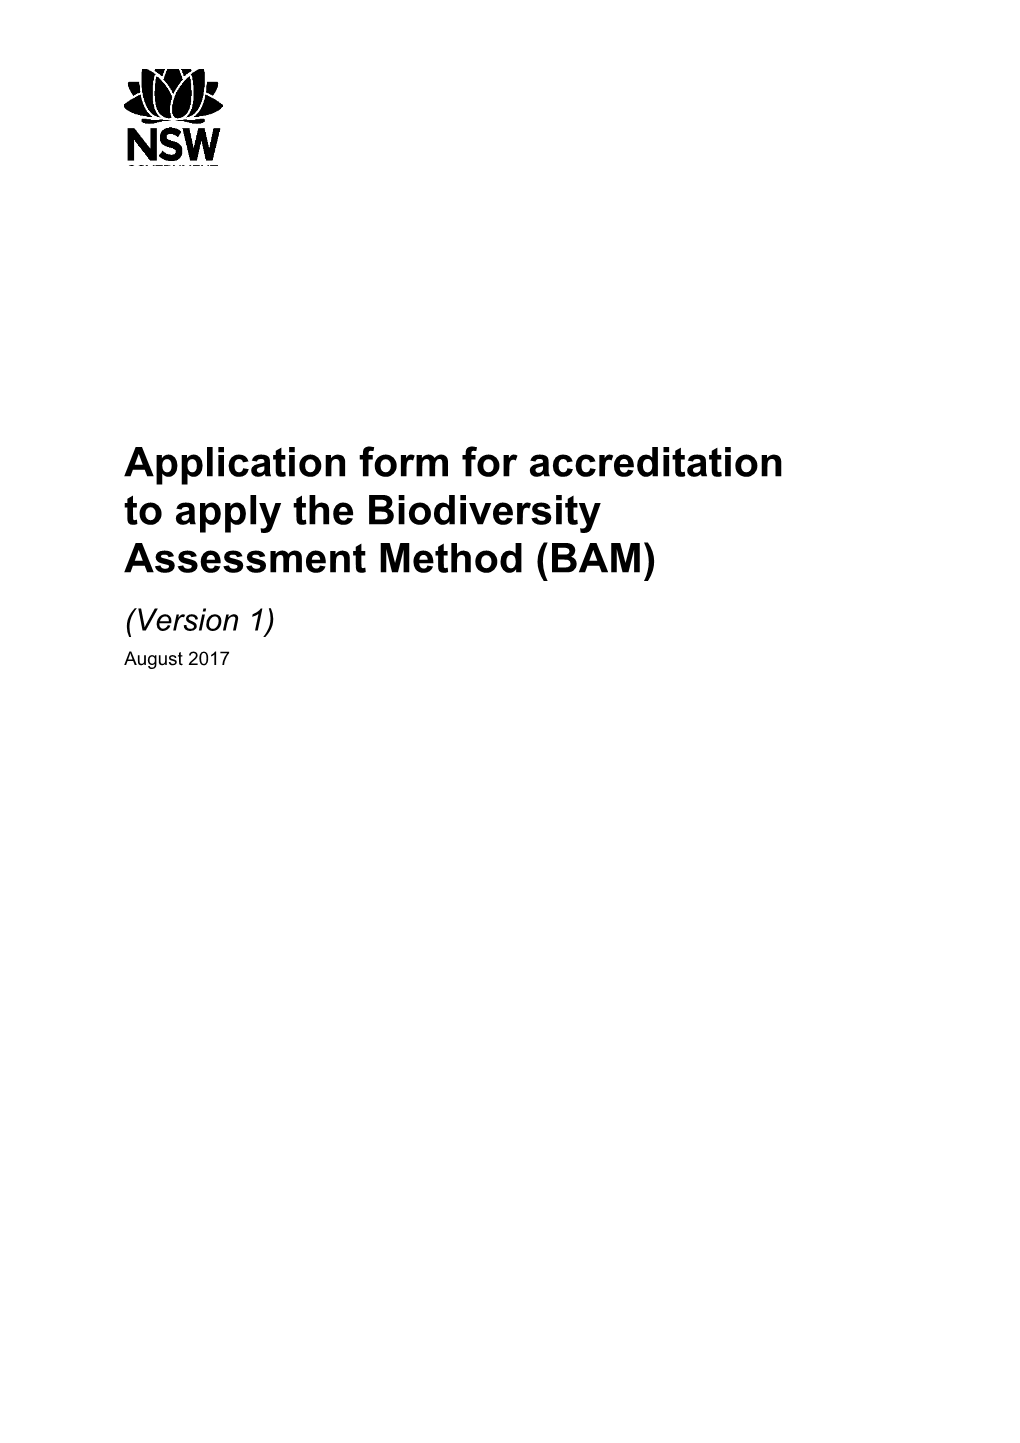 Application Form for Accreditation to Apply the Biodiversity Assessment Method (BAM)